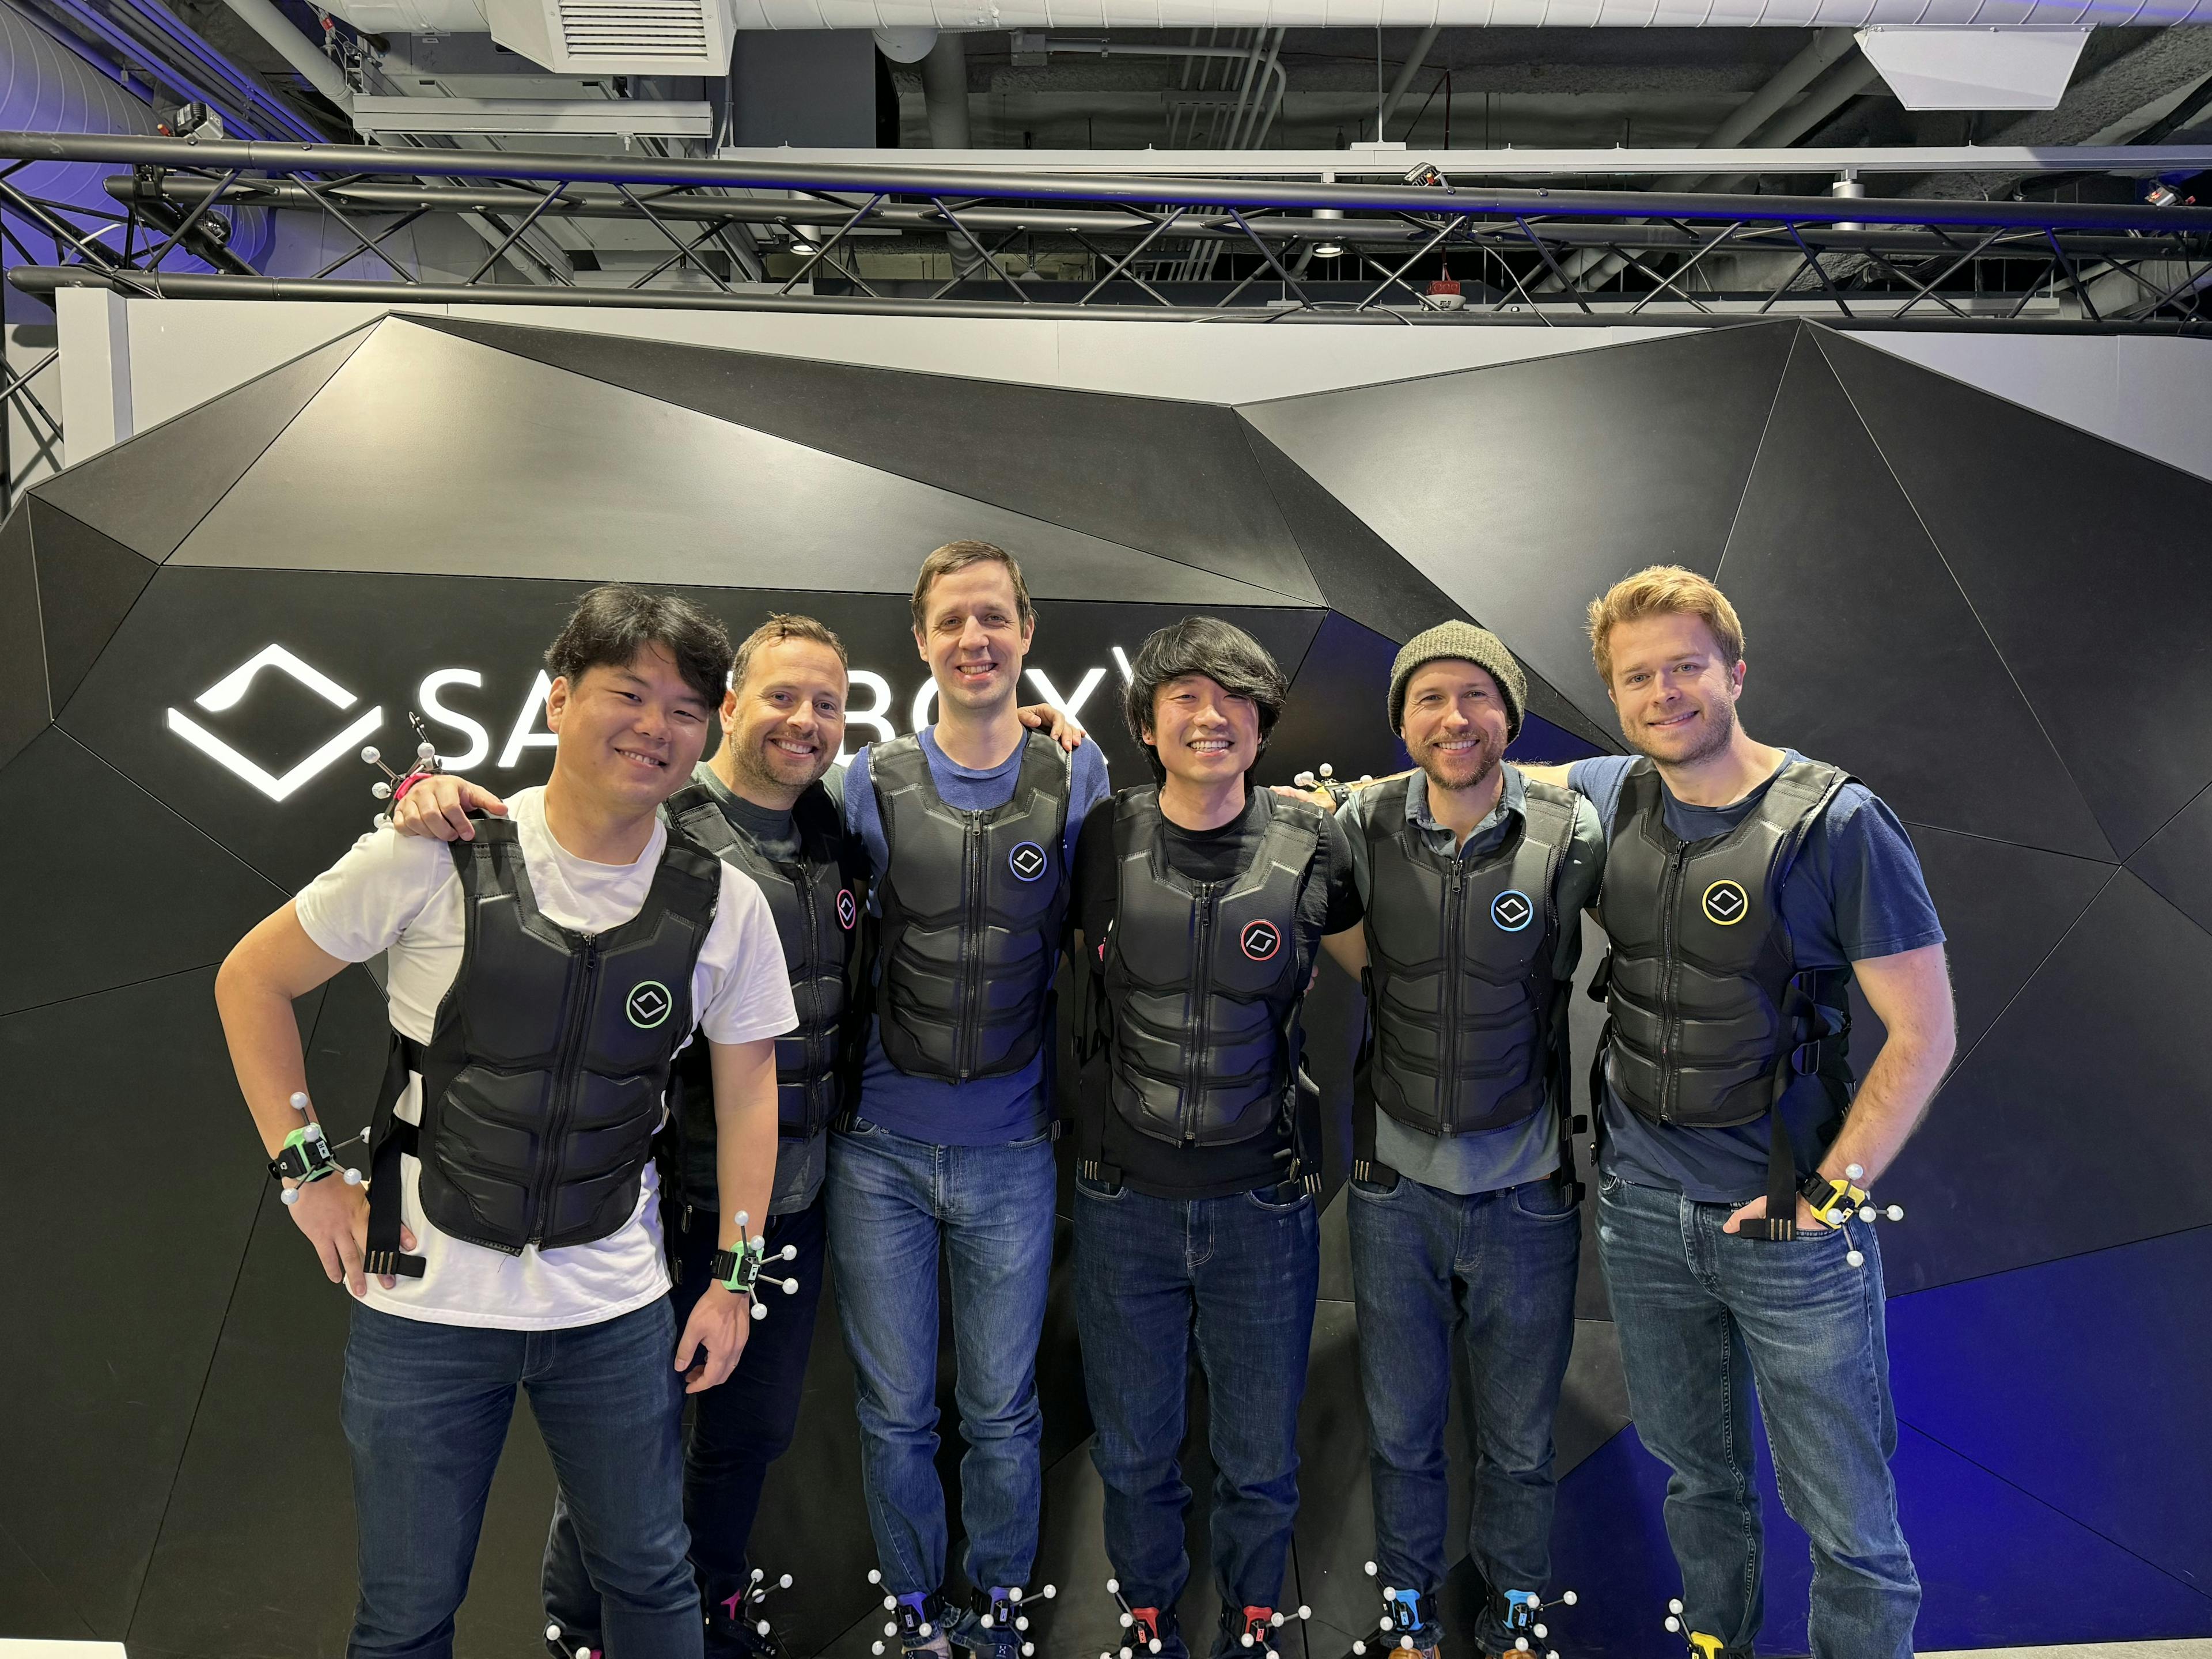 Team photo at a VR team building event